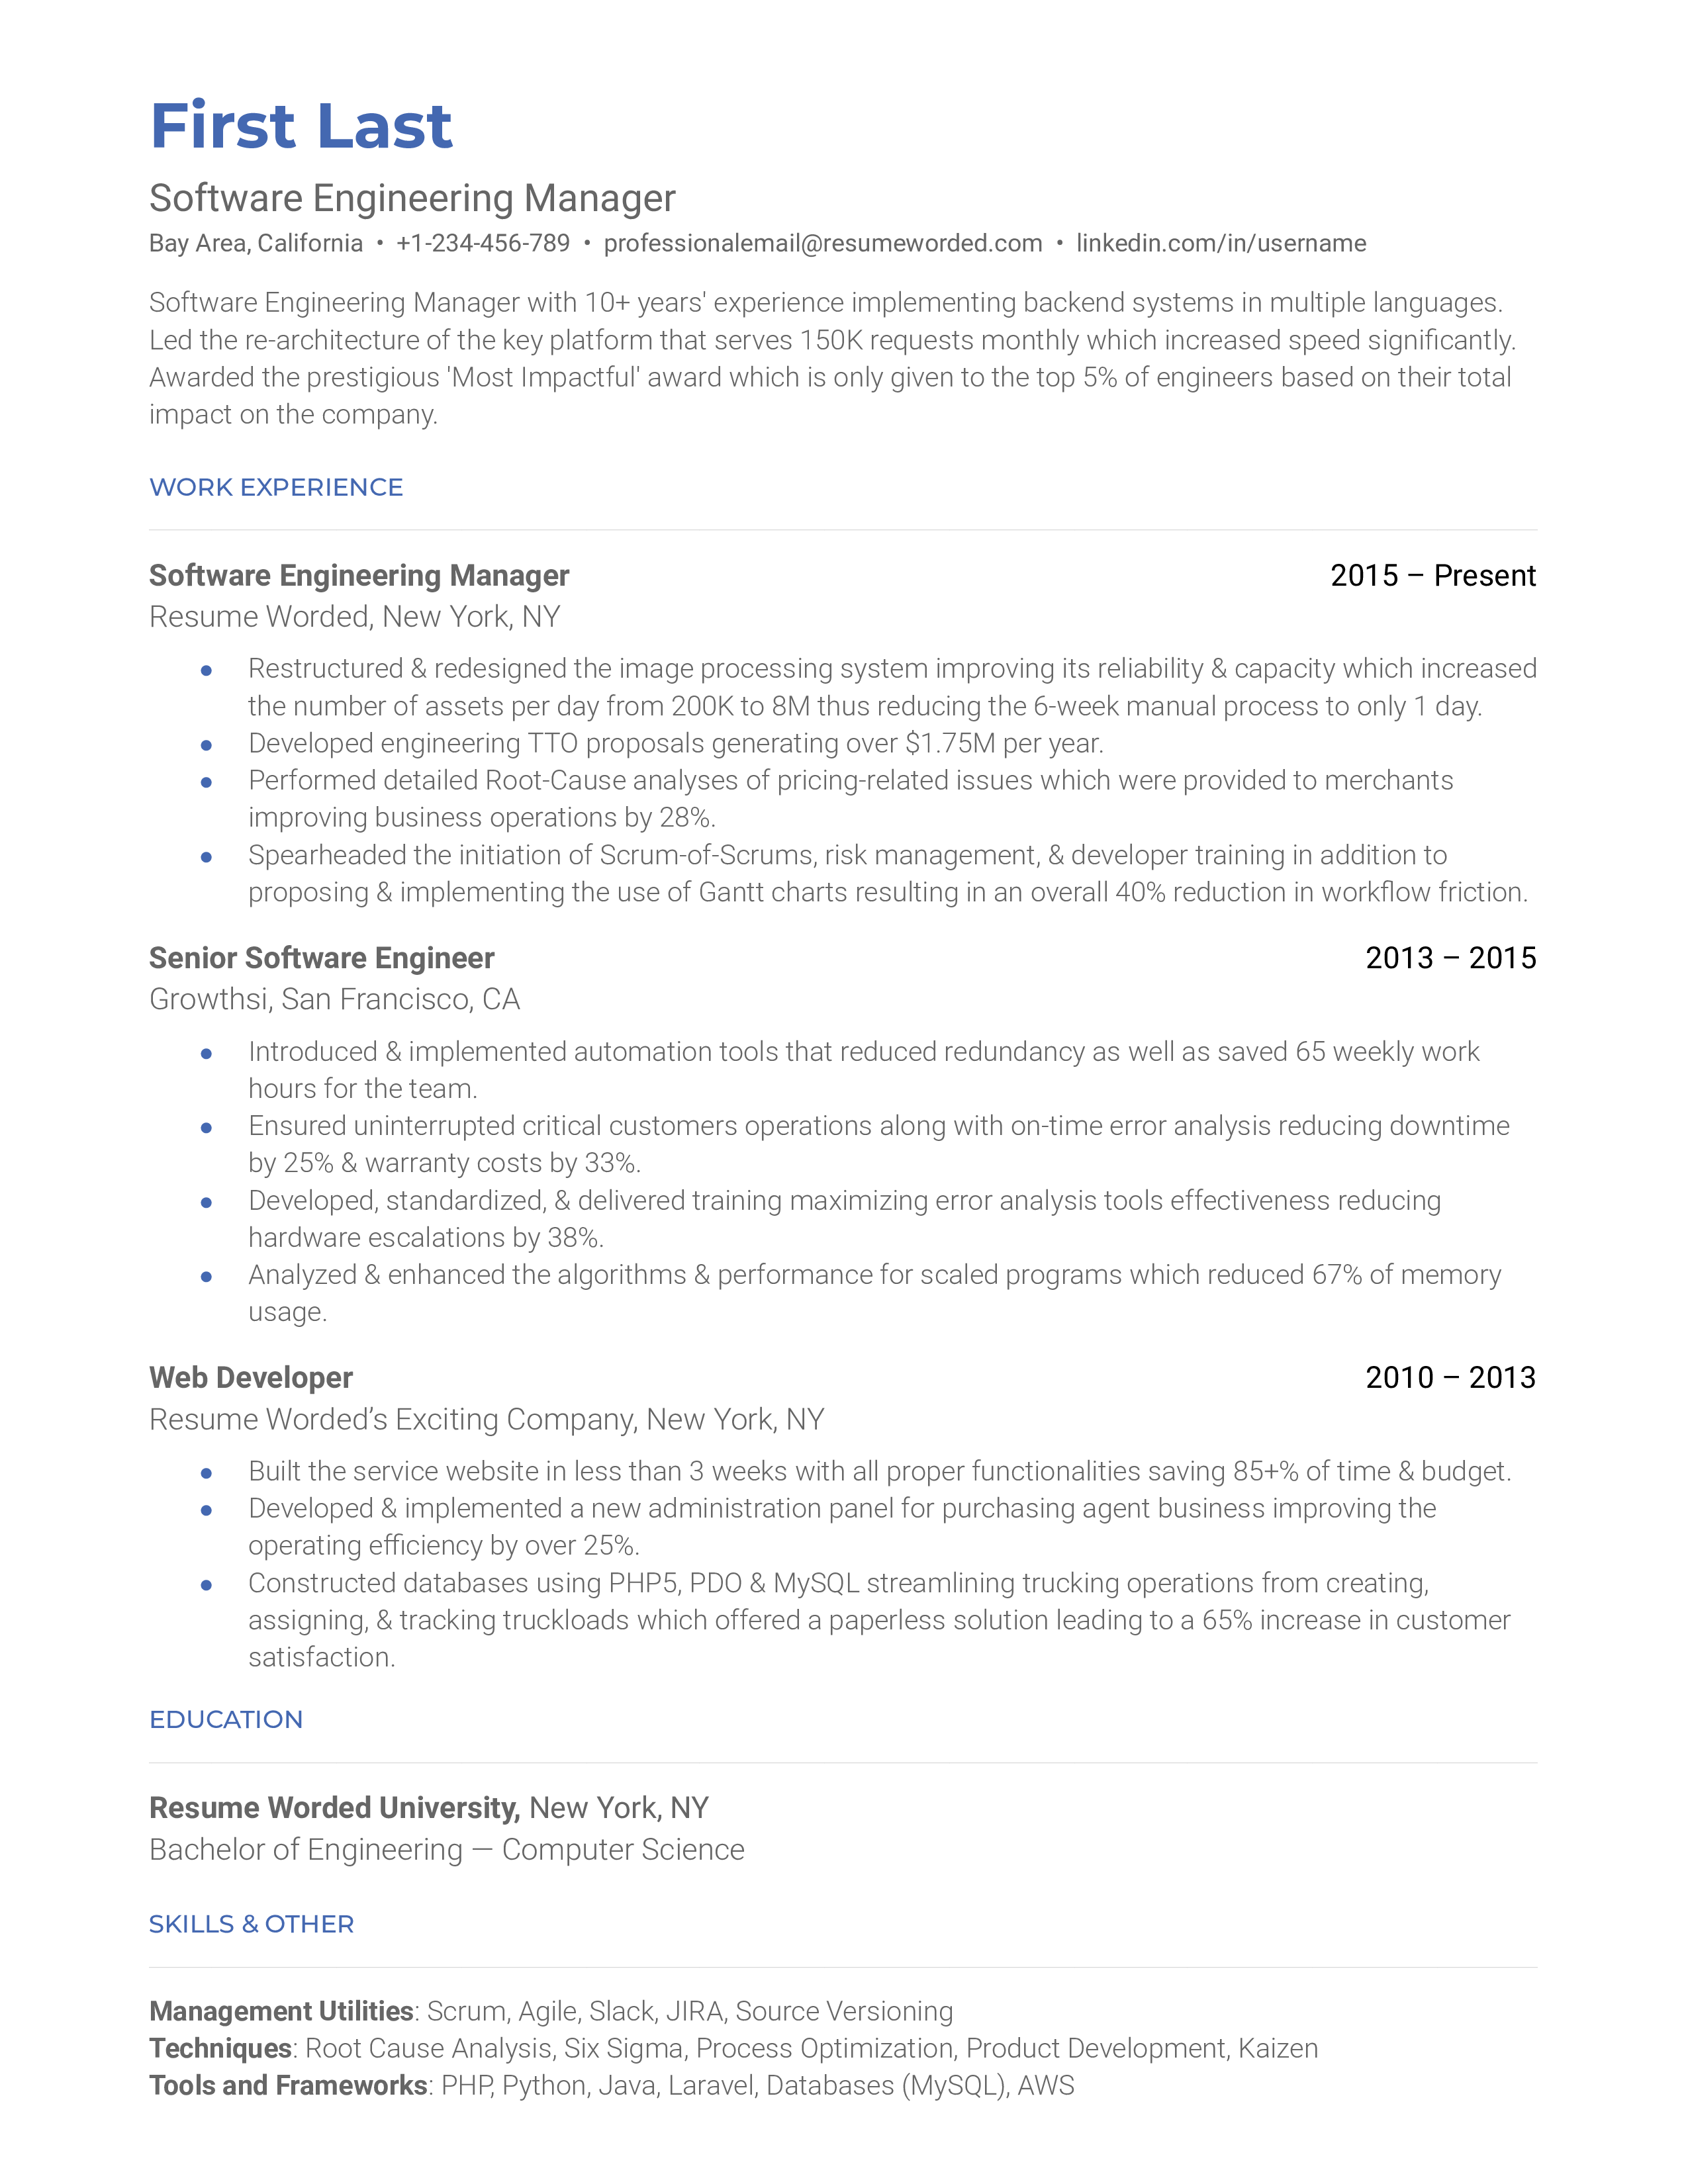 Screenshot of a CV for a Software Engineering Manager role.